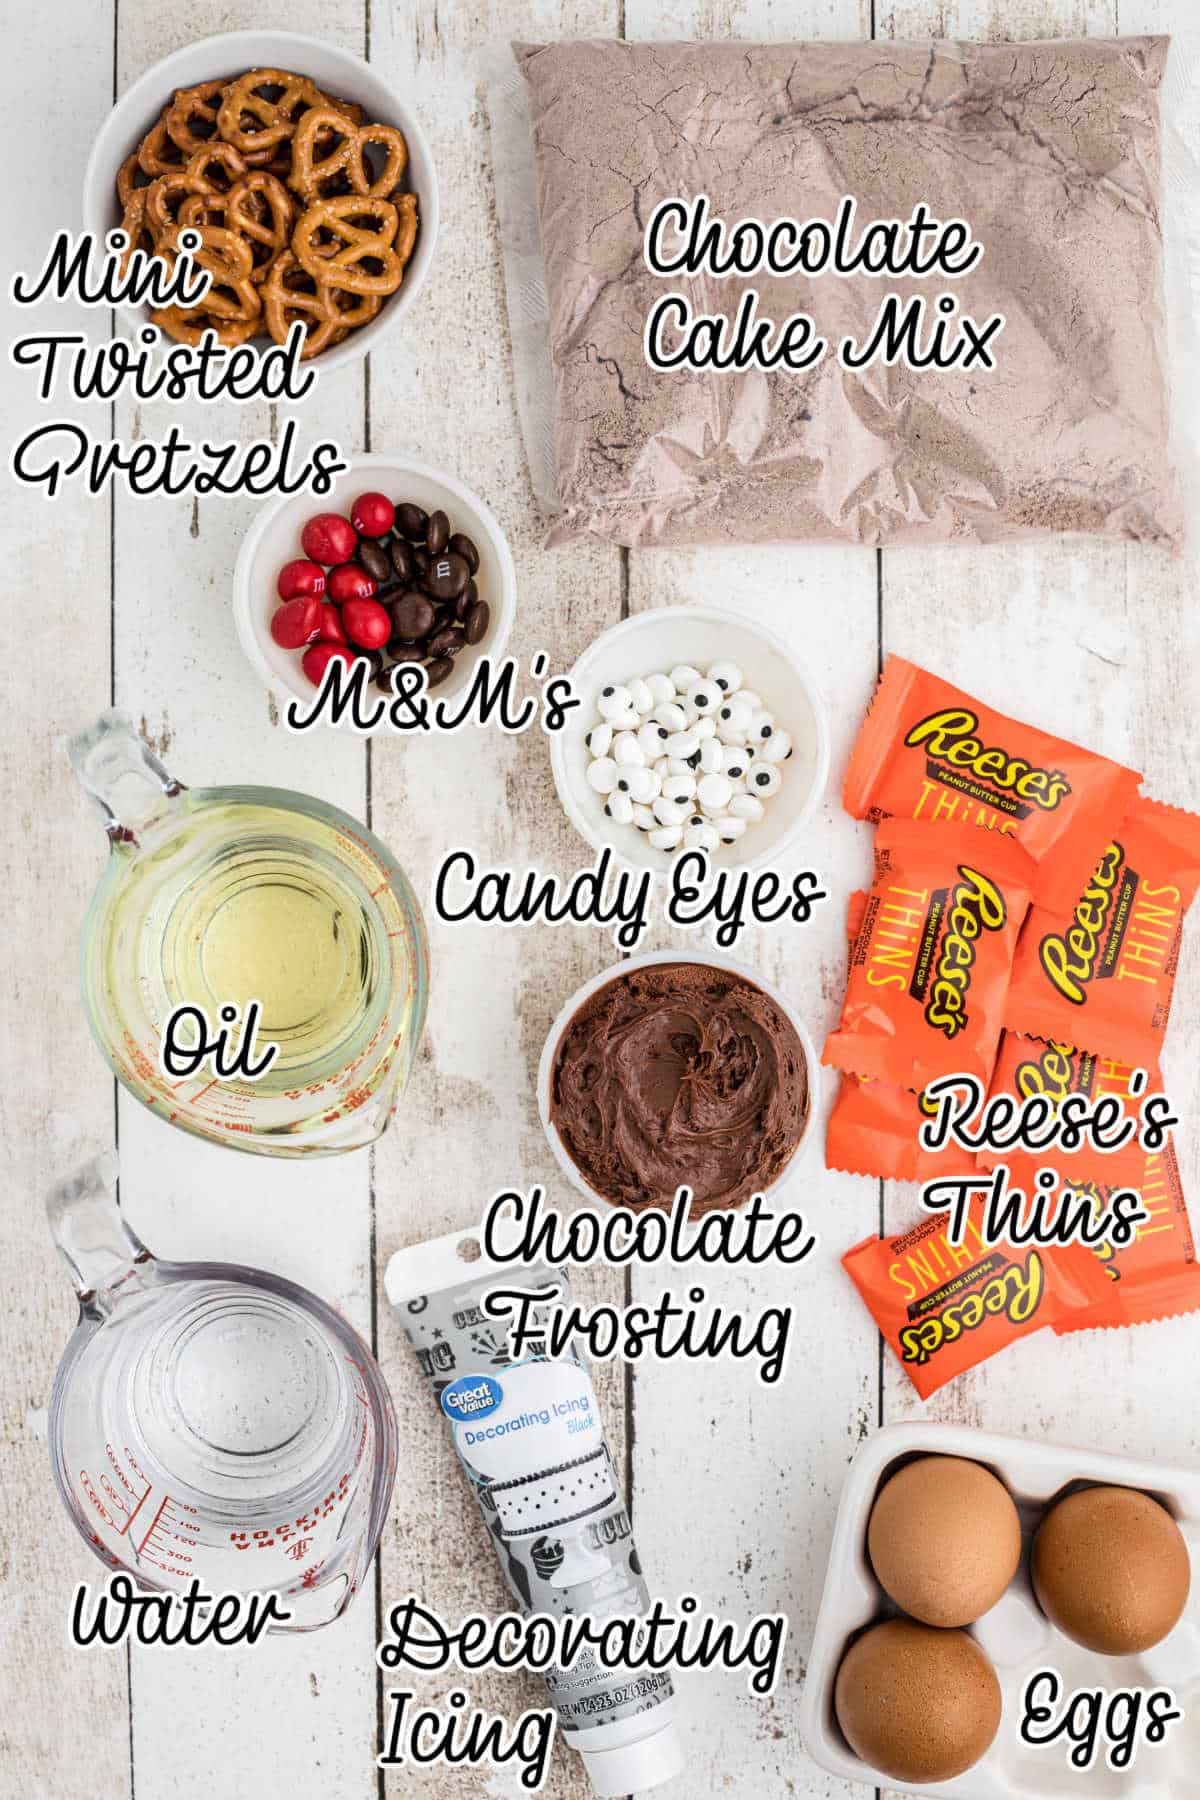 Overhead shot of ingredients that would be needed to make Reindeer cupcakes with text overlay.